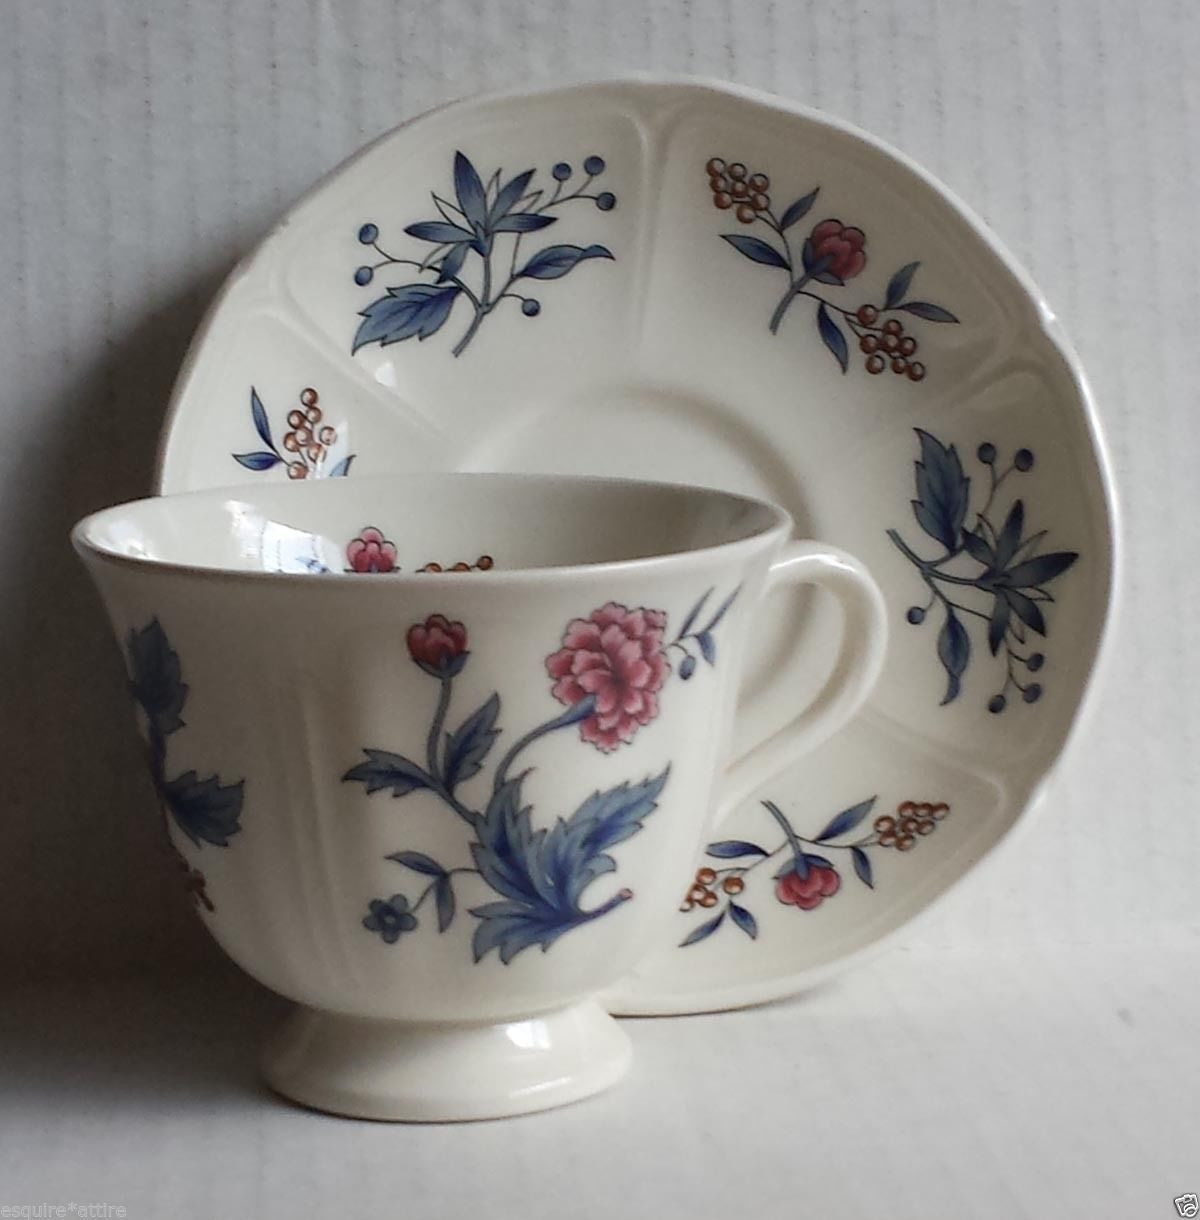 17 Elegant Williamsburg Pottery Vase 2024 free download williamsburg pottery vase of wedgwood williamsburg potpourri nk510 footed cup saucer made in for collectible wedgwood williamsburg potpourri nk510 footed cup